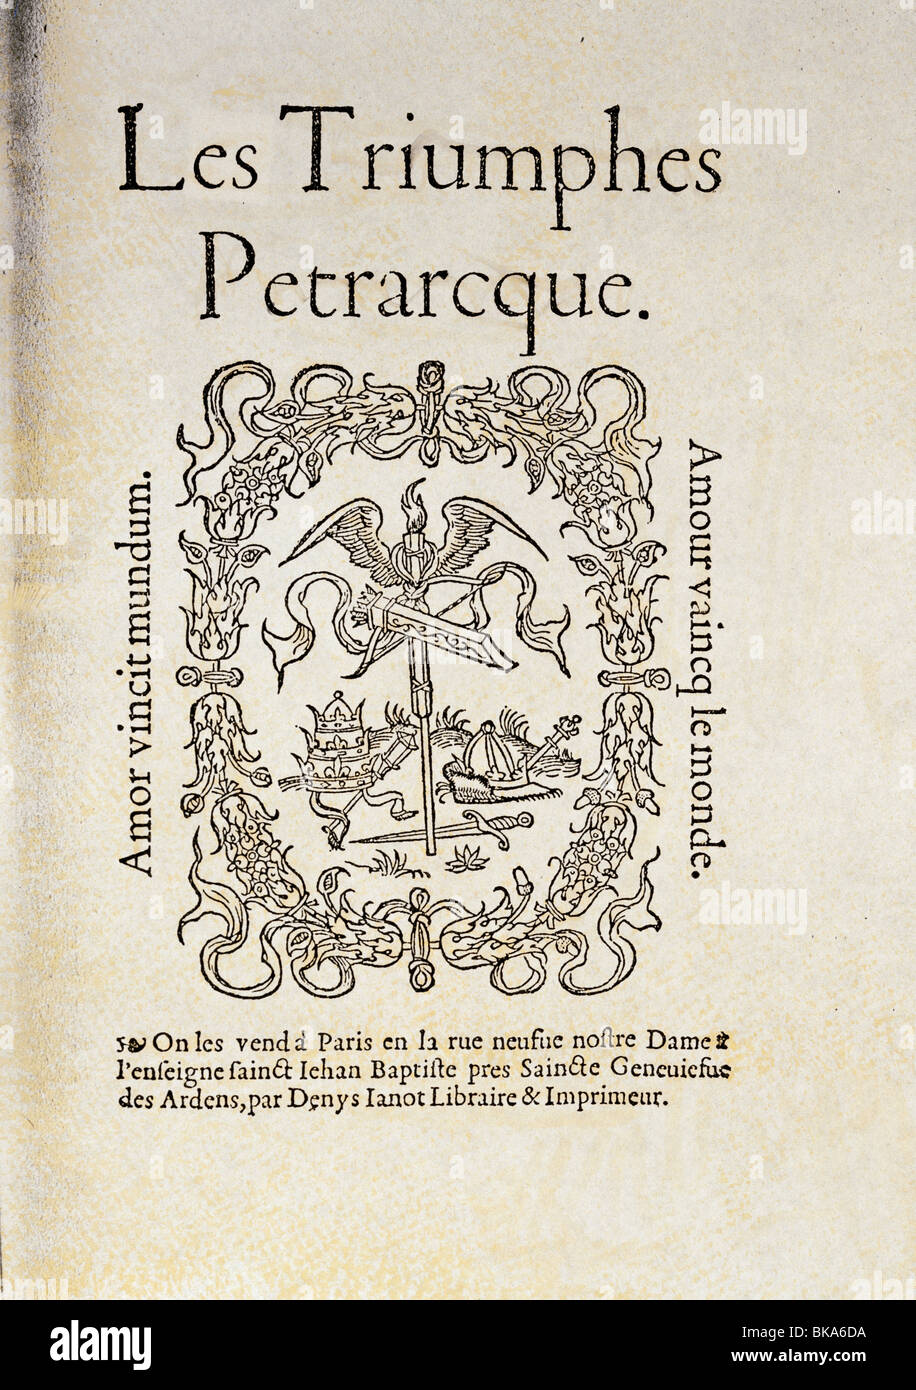 Petrarca, Francesco, 20.7.1304 - 19.7.1374, Italian humanist and author / writer, work, 'Triomph', cover, French edition, printed by Janot, Paris, 1539, Stock Photo